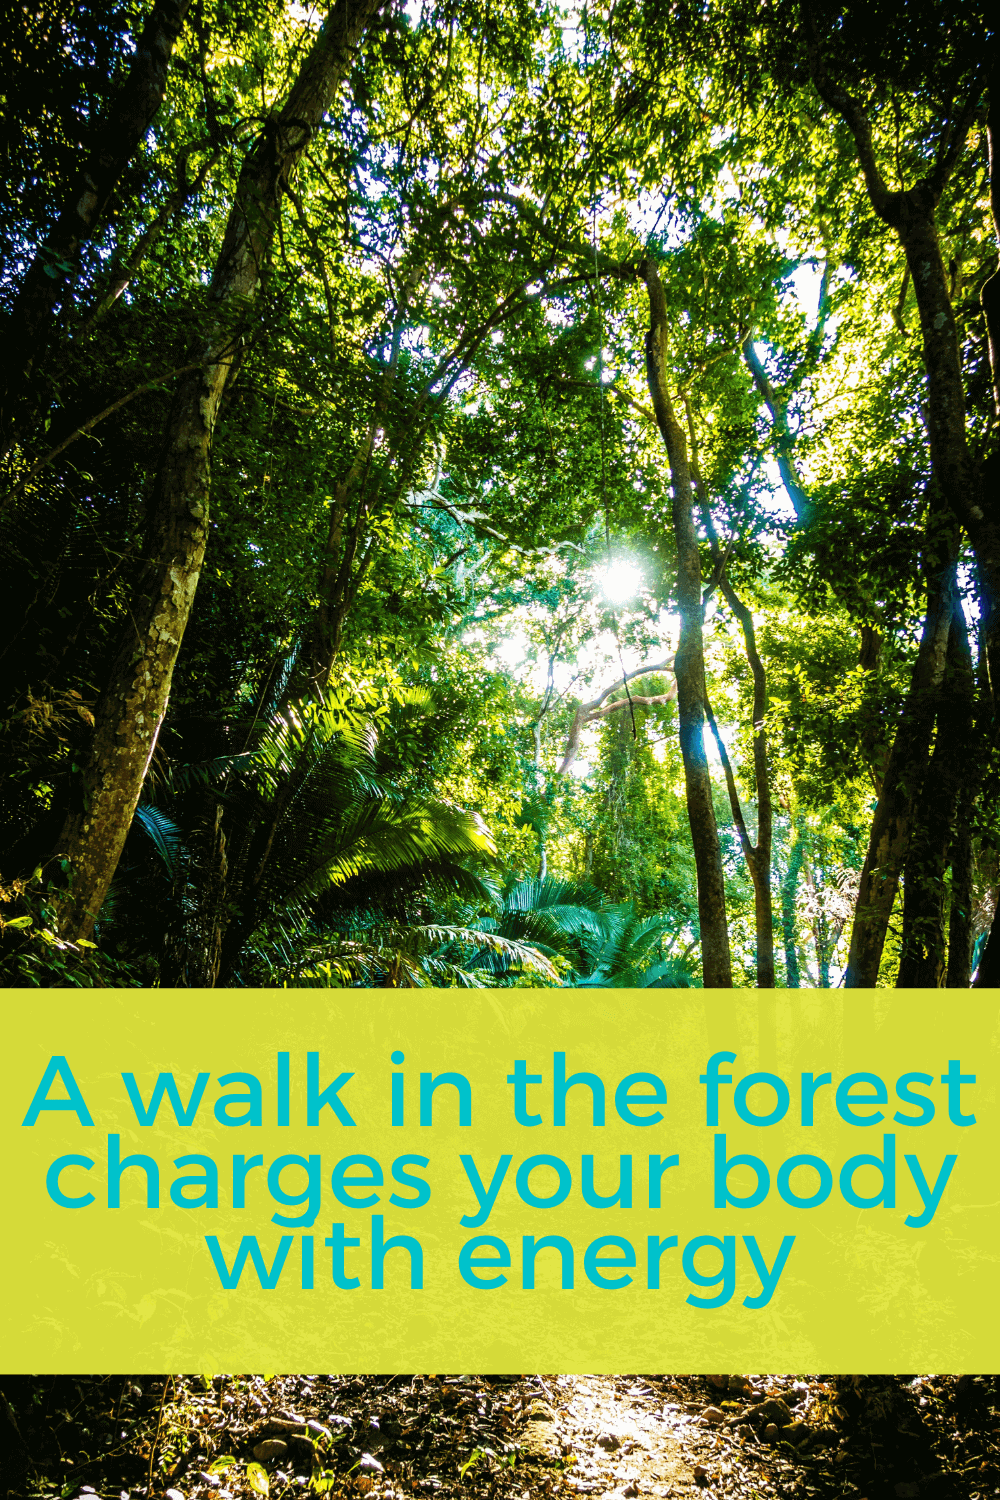 A walk in the forest charges your body with energy